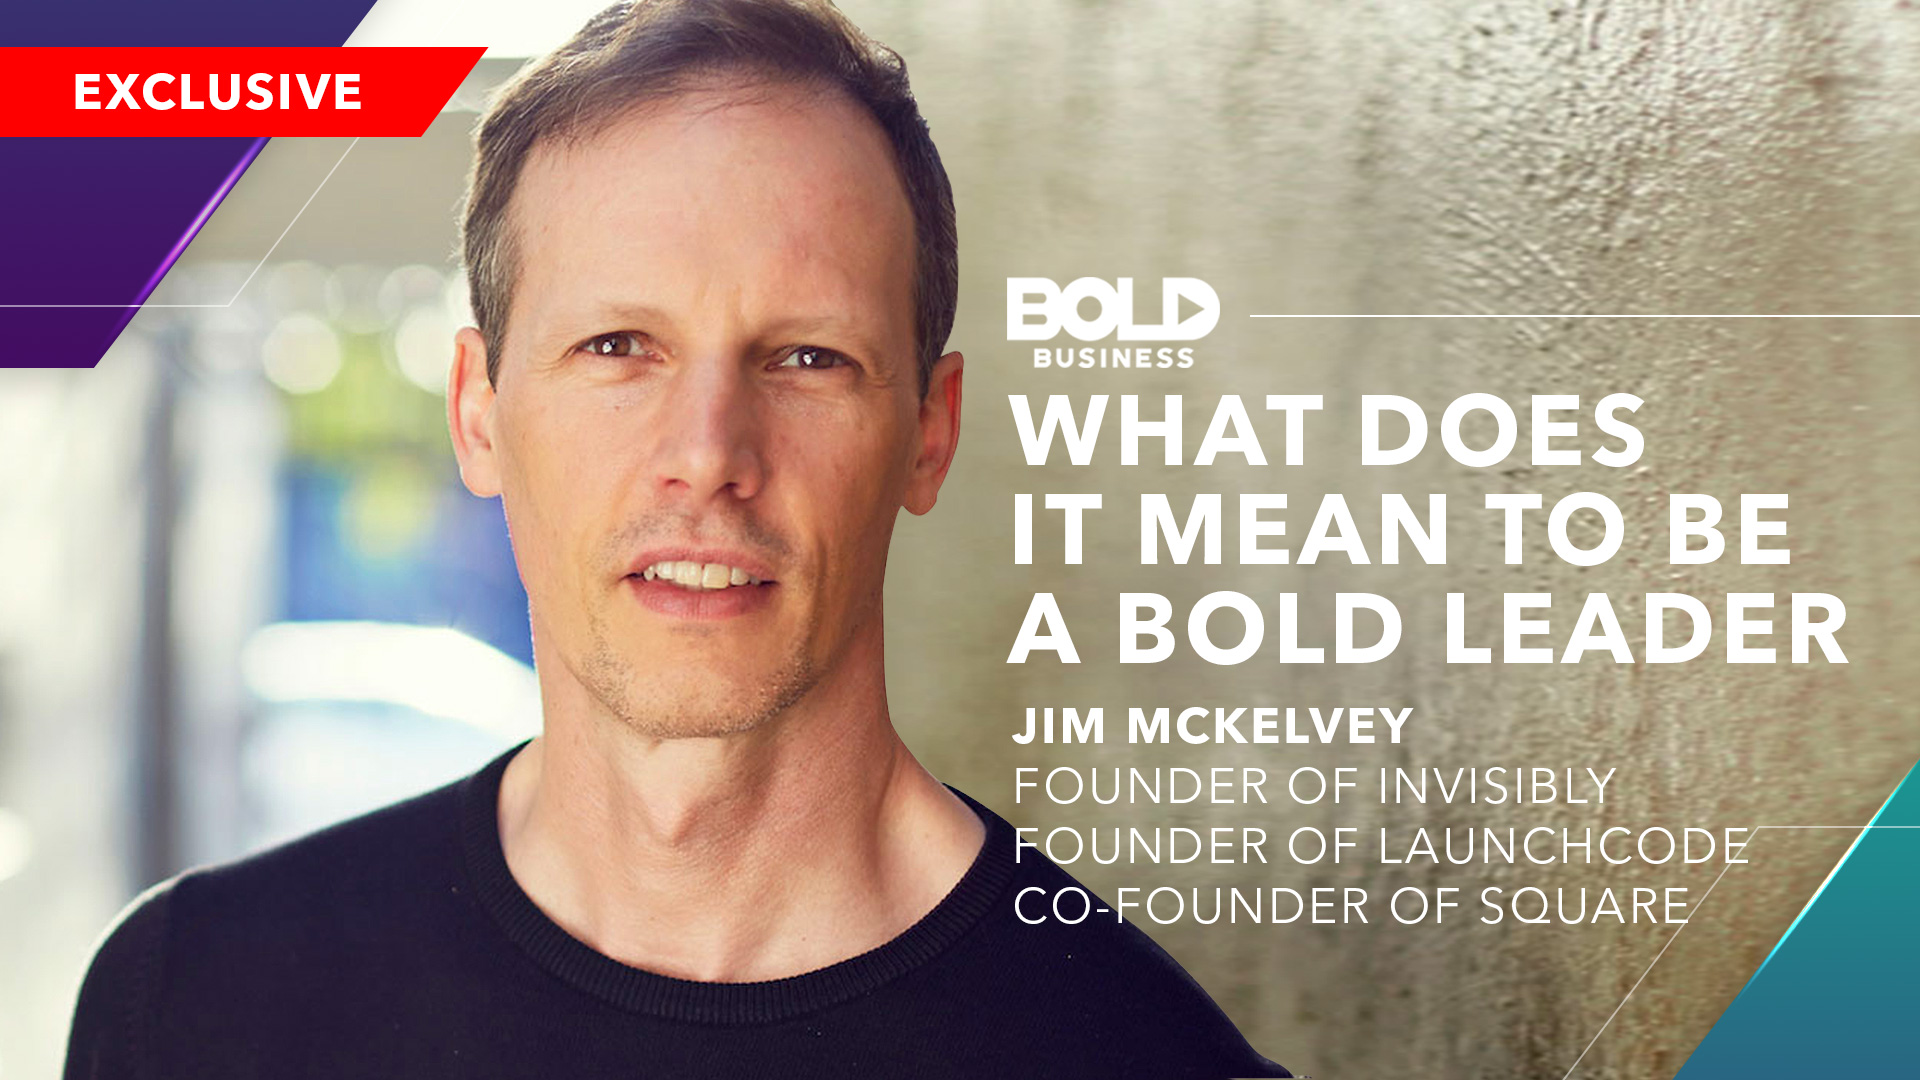 Jim McKelvey, Square Founder: What Makes A Leader BOLD?